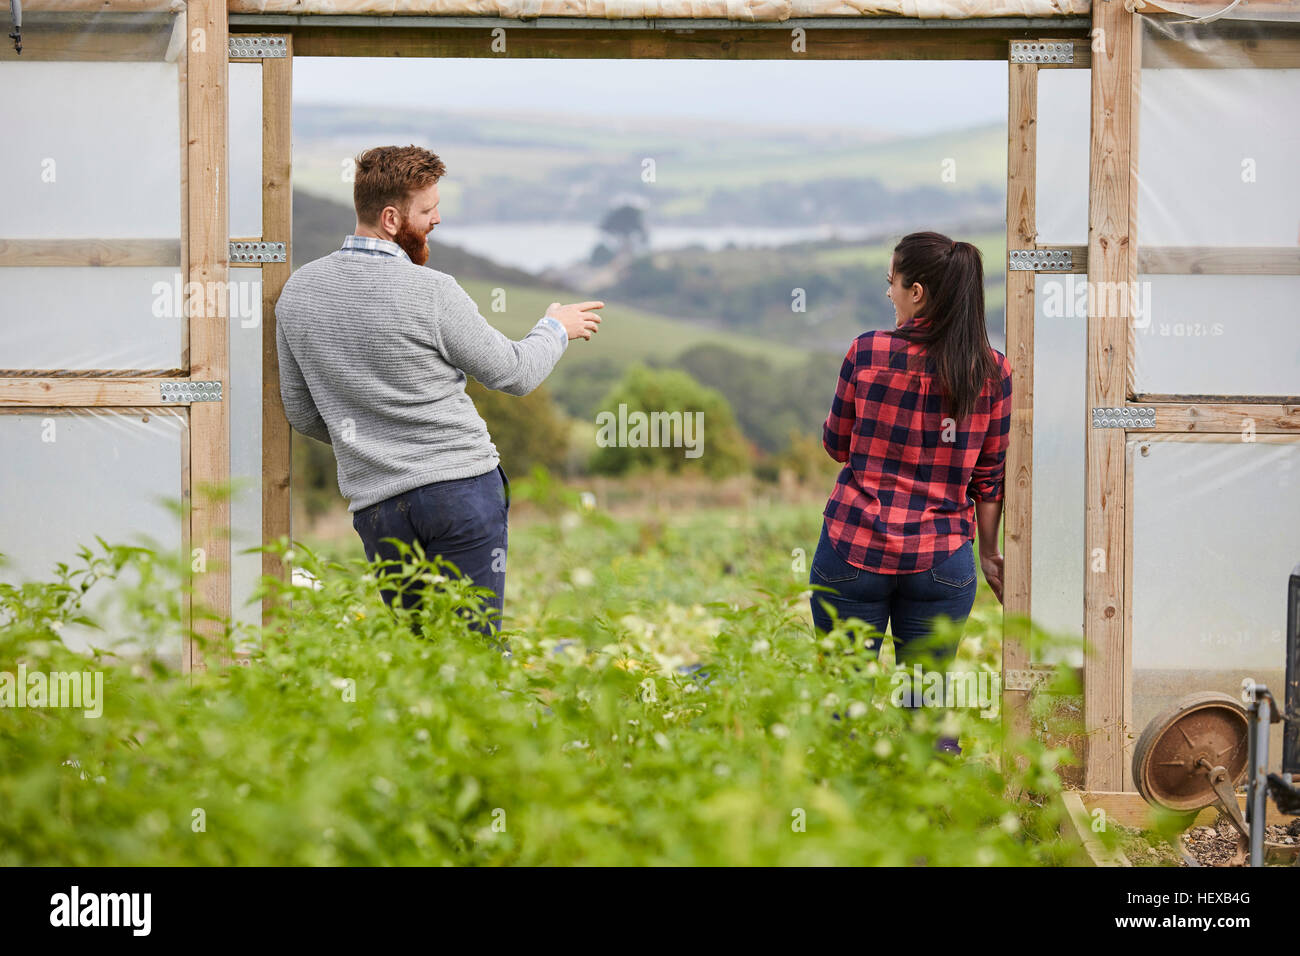 Rear view of couple in polytunnel doorway chatting Stock Photo